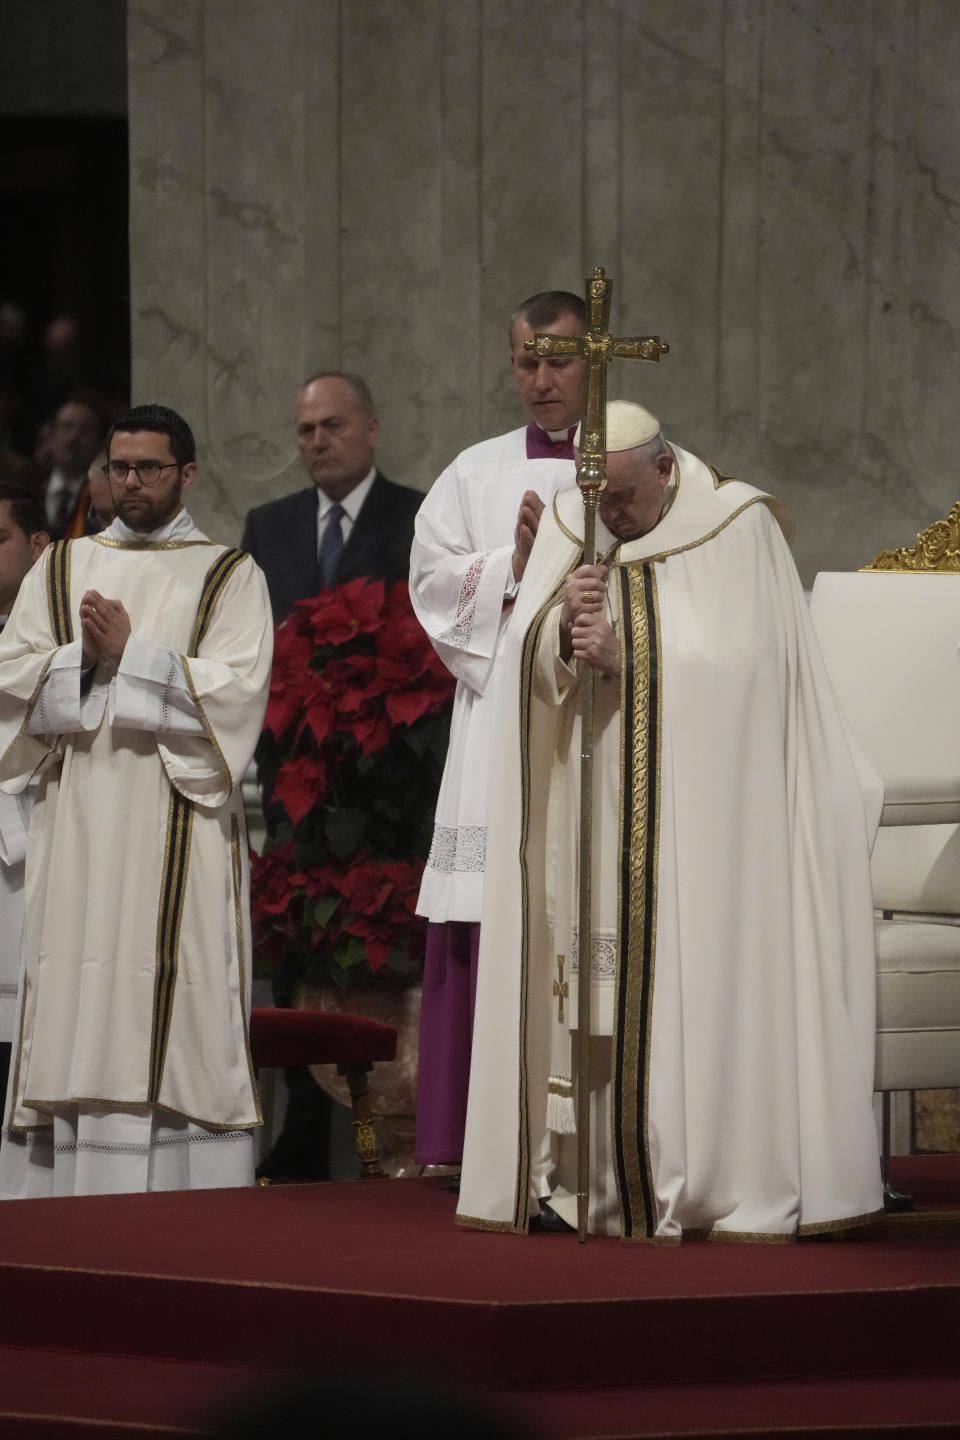 Pope Francis holds his pastoral staff as he presides over Christmas Eve Mass, at St. Peter's Basilica at the Vatican, Saturday Dec. 24, 2022. (AP Photo/Gregorio Borgia)